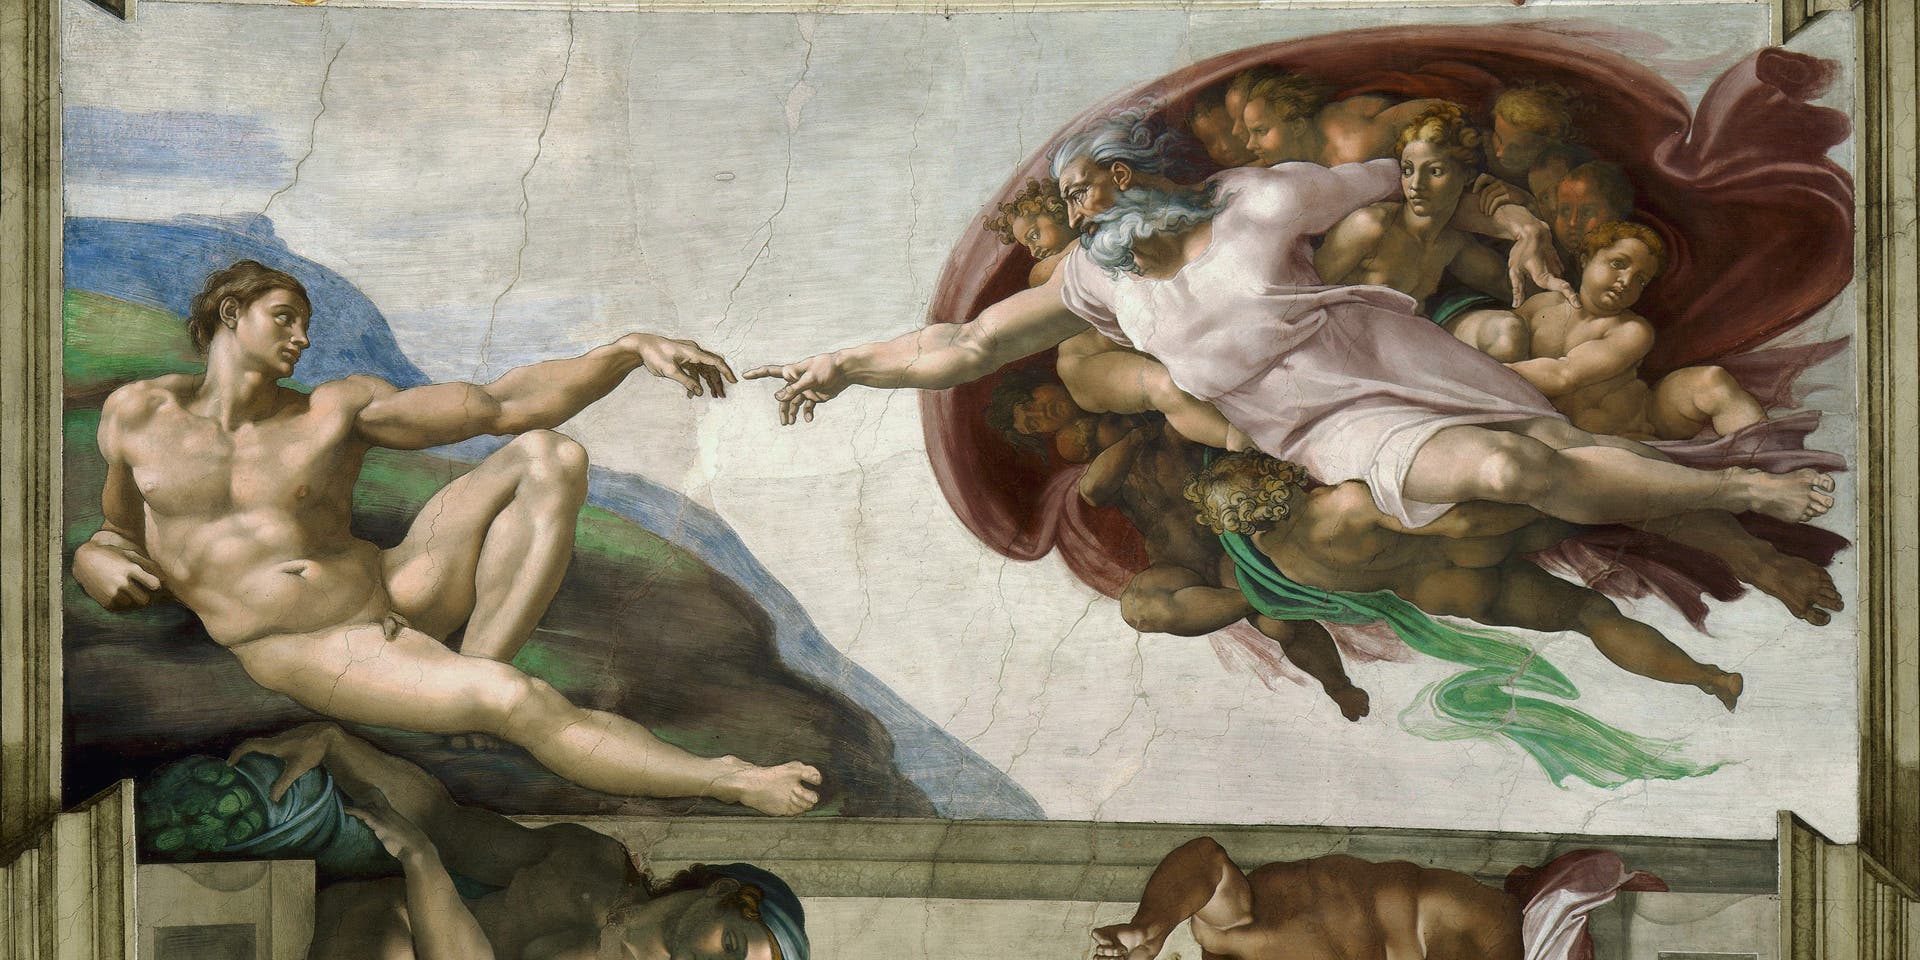 The Creation Of Adam (Sistine Chapel Ceiling In The Vatican)The Creation of Adam (Sistine Chapel ceiling in the Vatican), 1508-1512. Found in the collection of The Sistine Chapel, Vatican. Artist Buonarroti, Michelangelo (1475-1564). (Photo by Fine Art Images/Heritage Images via Getty Images).